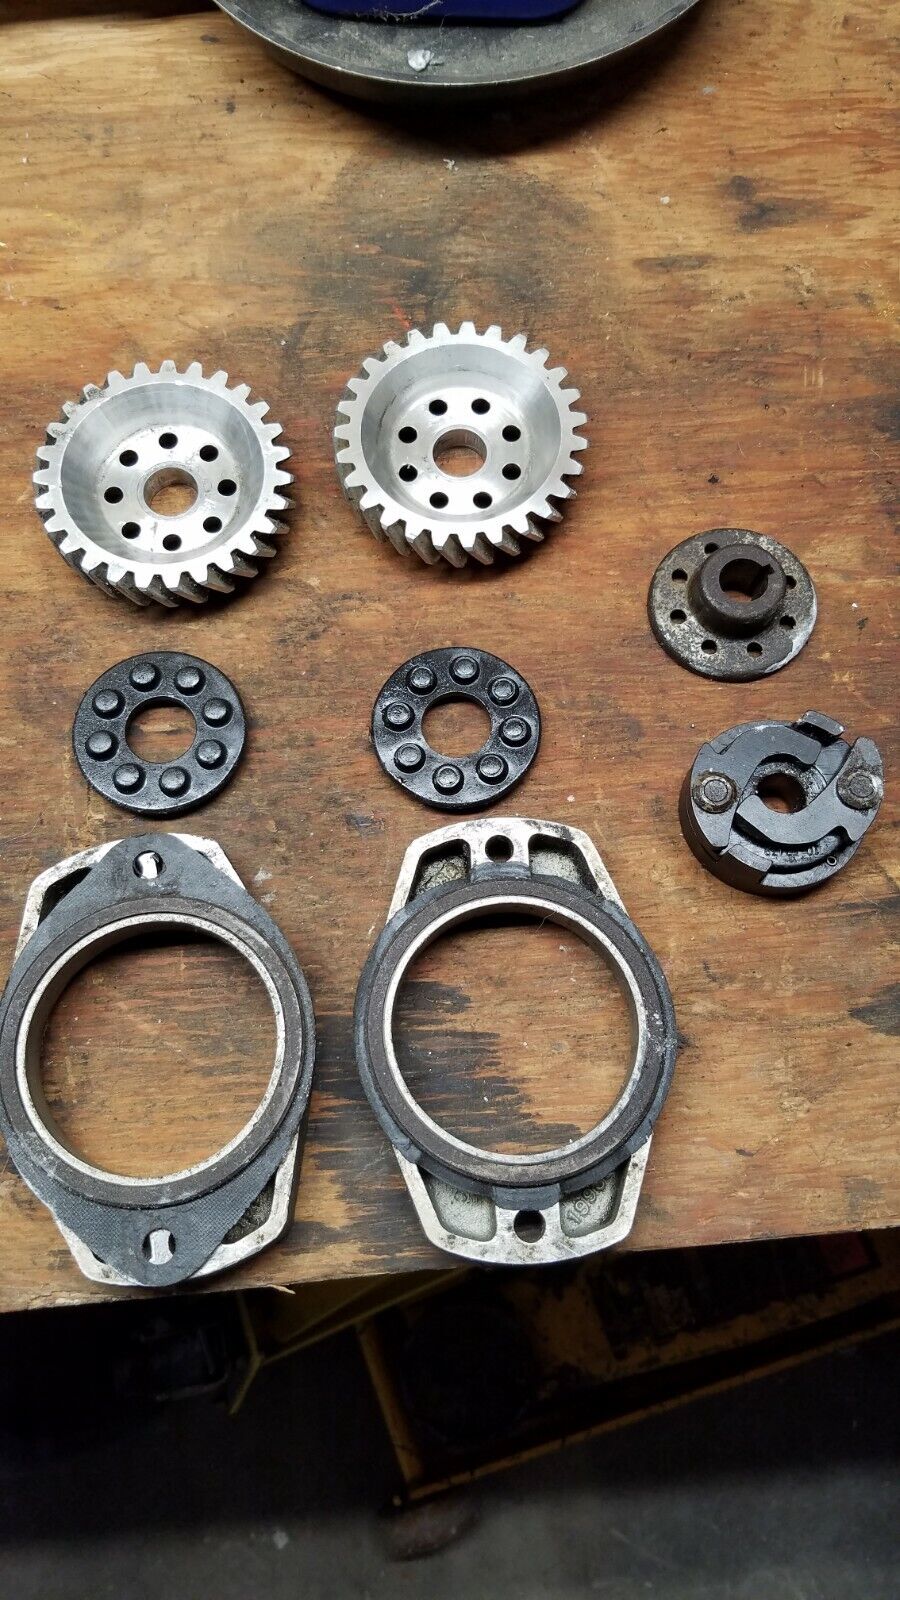 Franklin Engine Magneto Gears/adapters/impulse coupling,complete